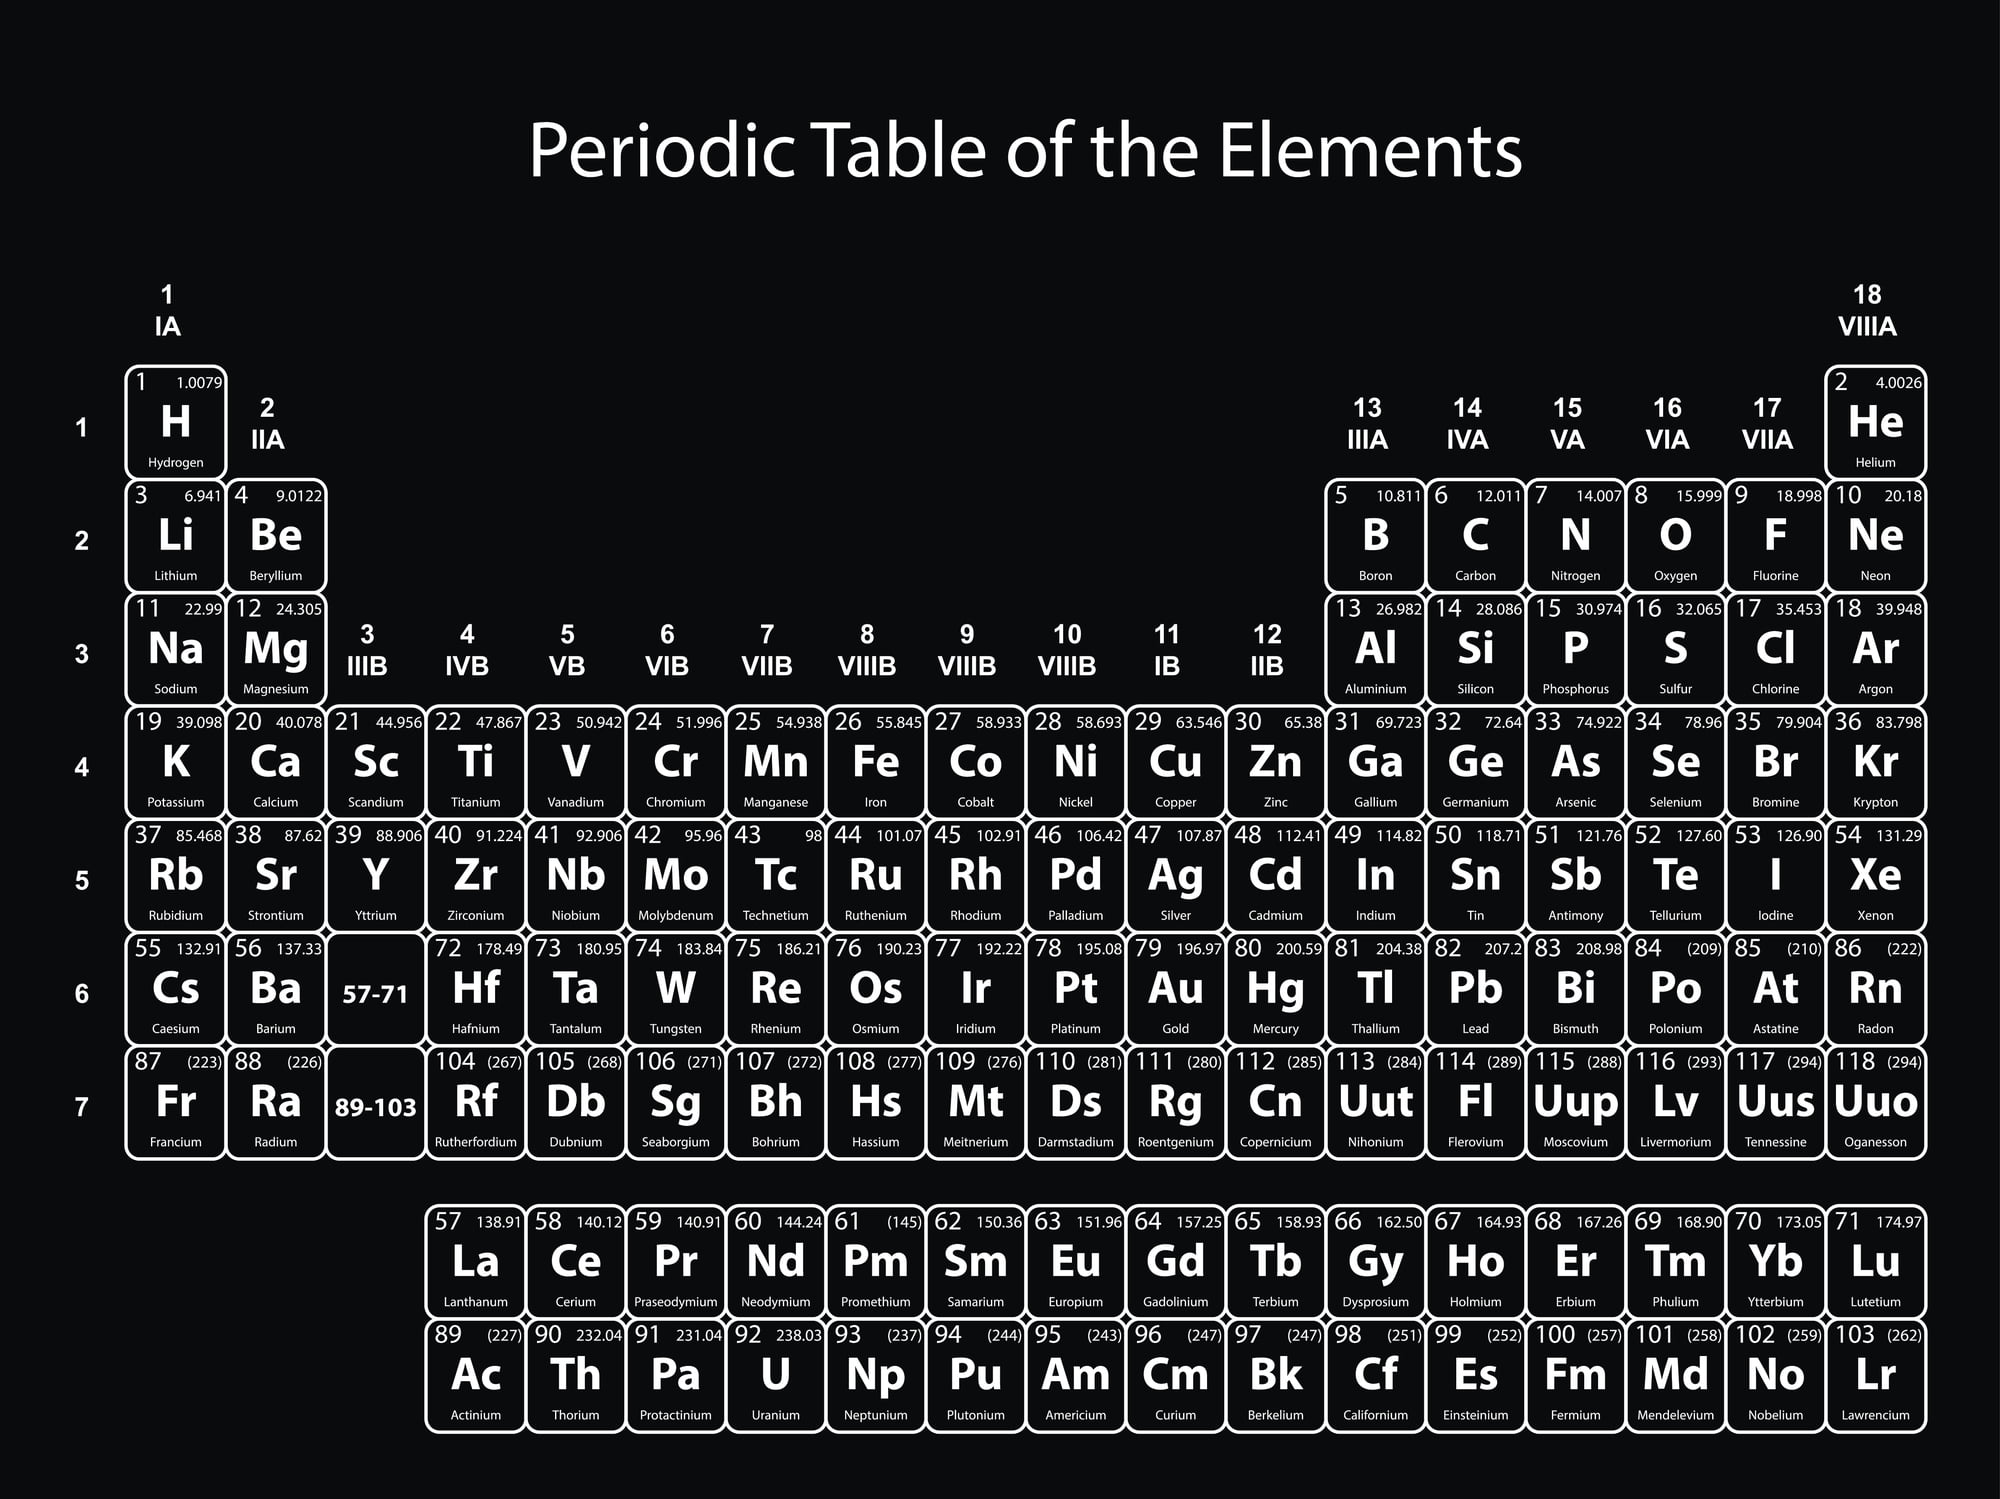 Name the Elements